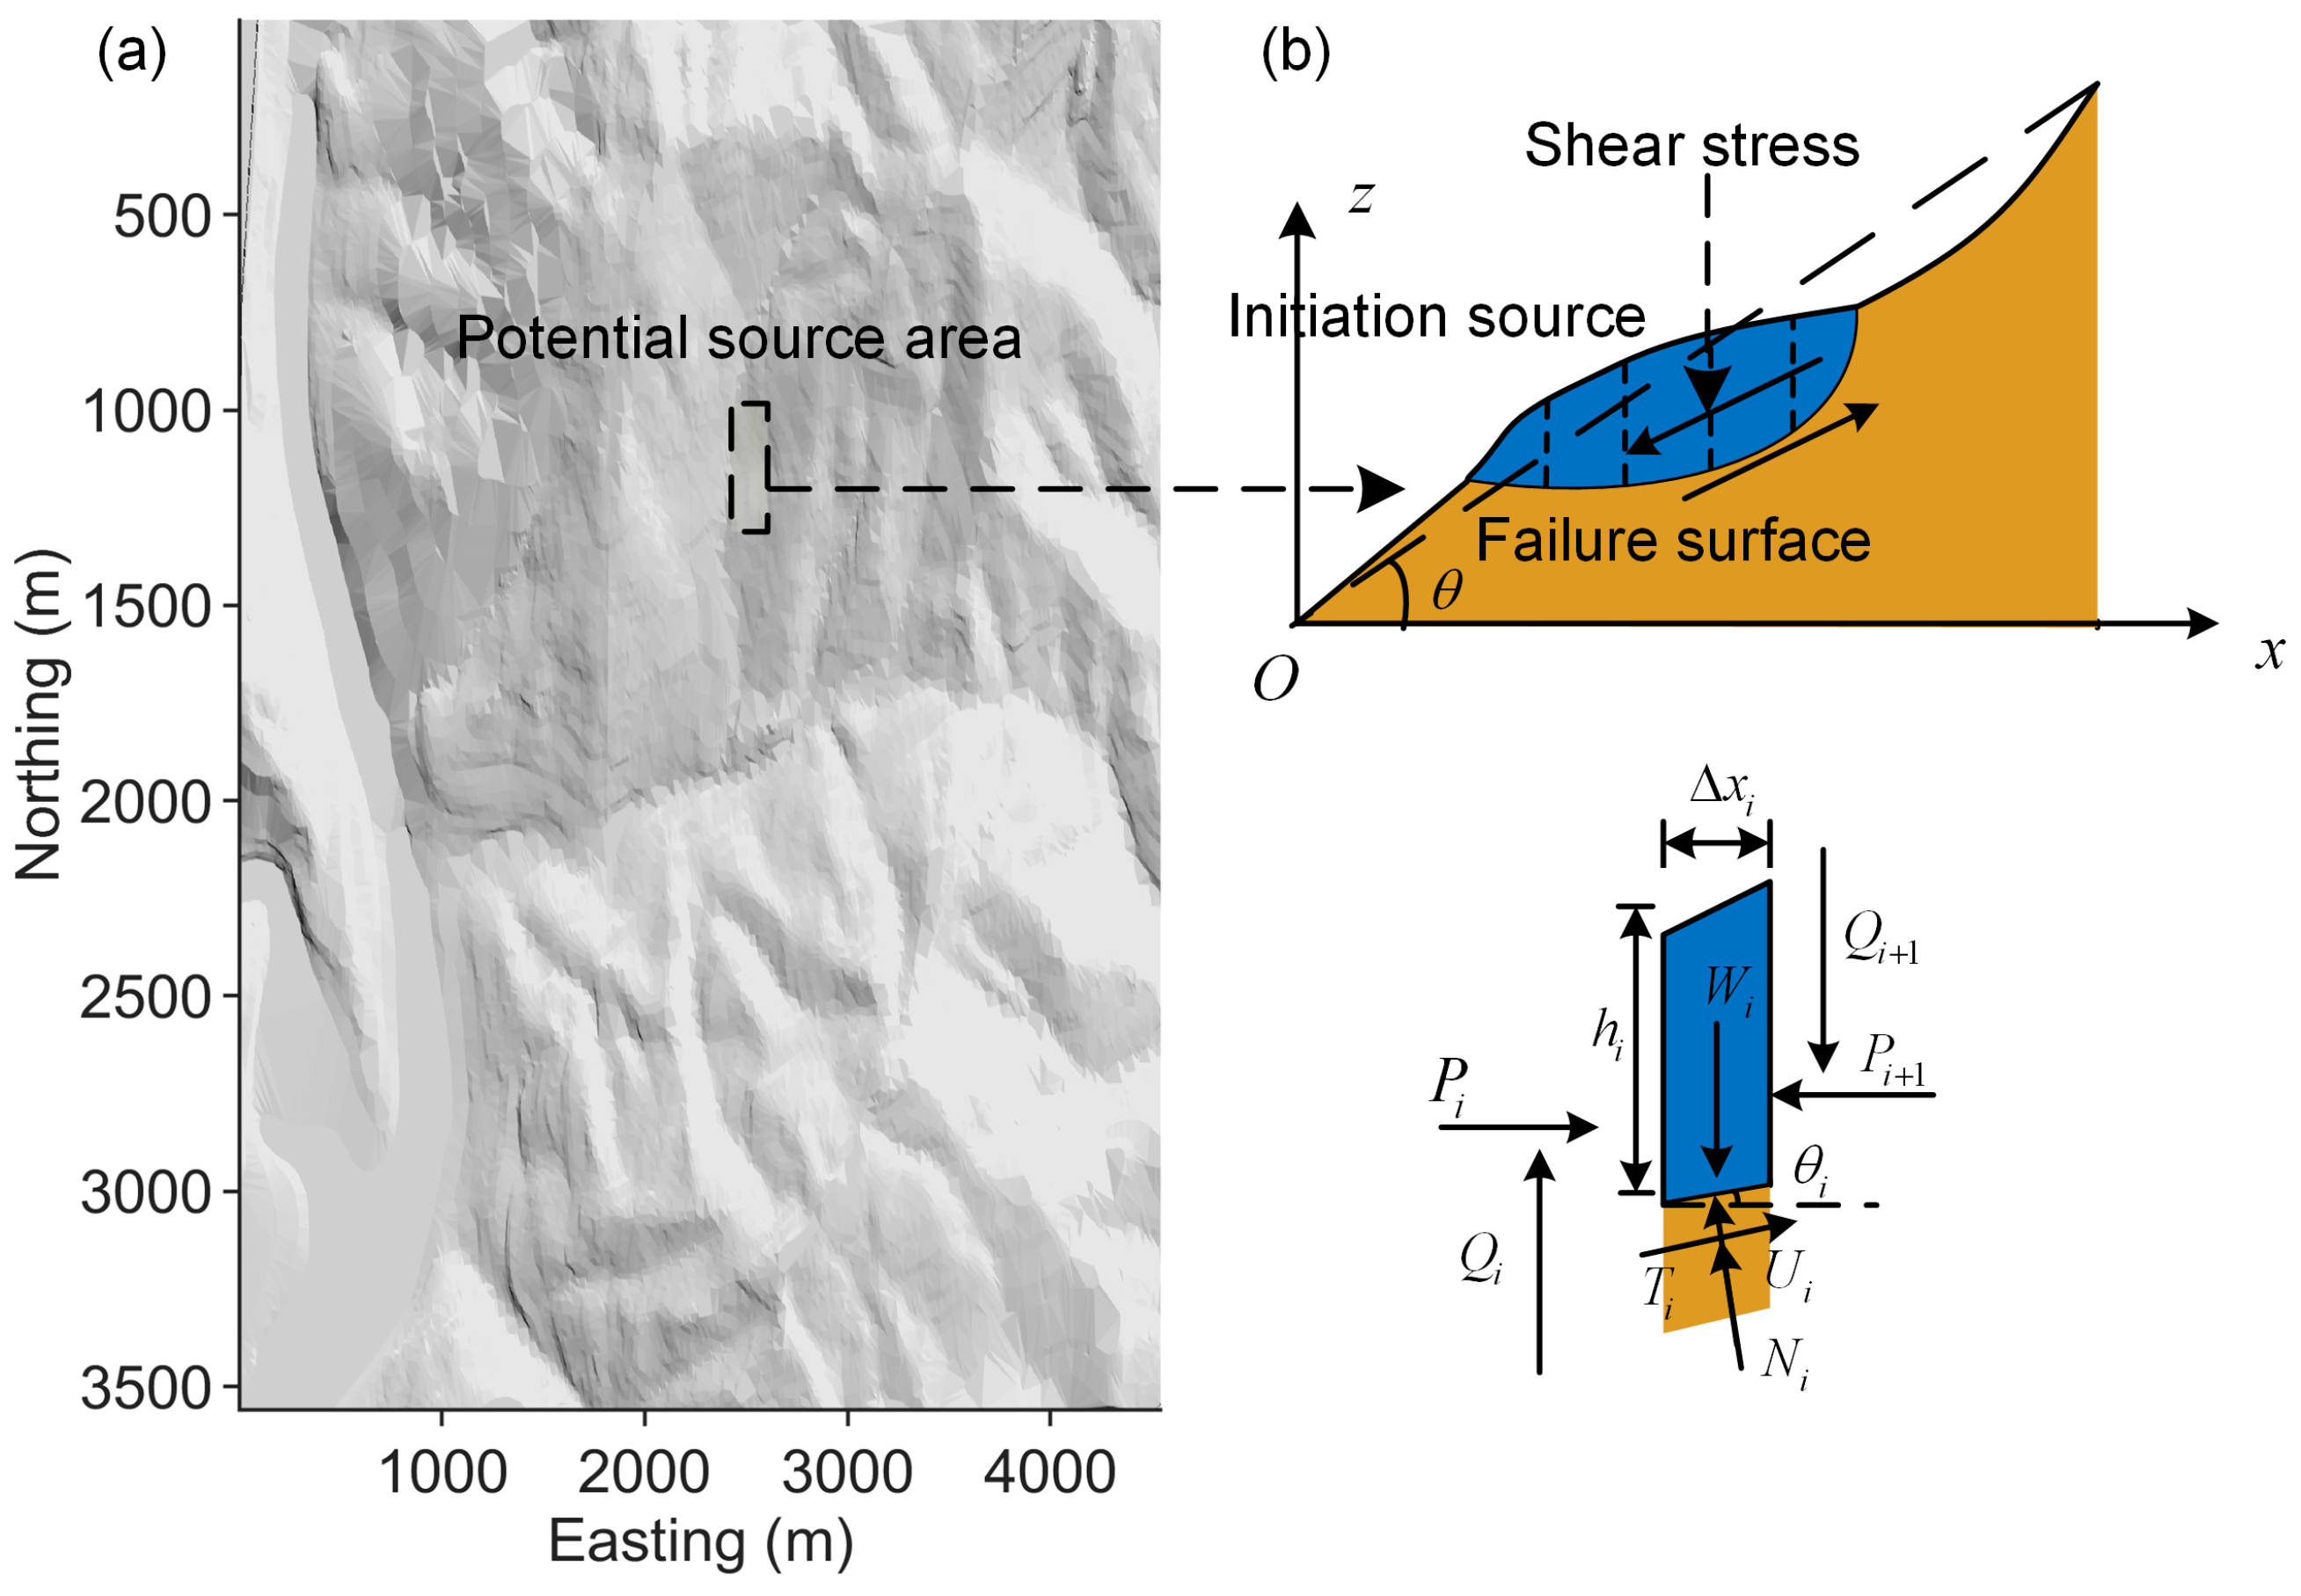 NHESS - Stability evaluation and potential failure process of rock